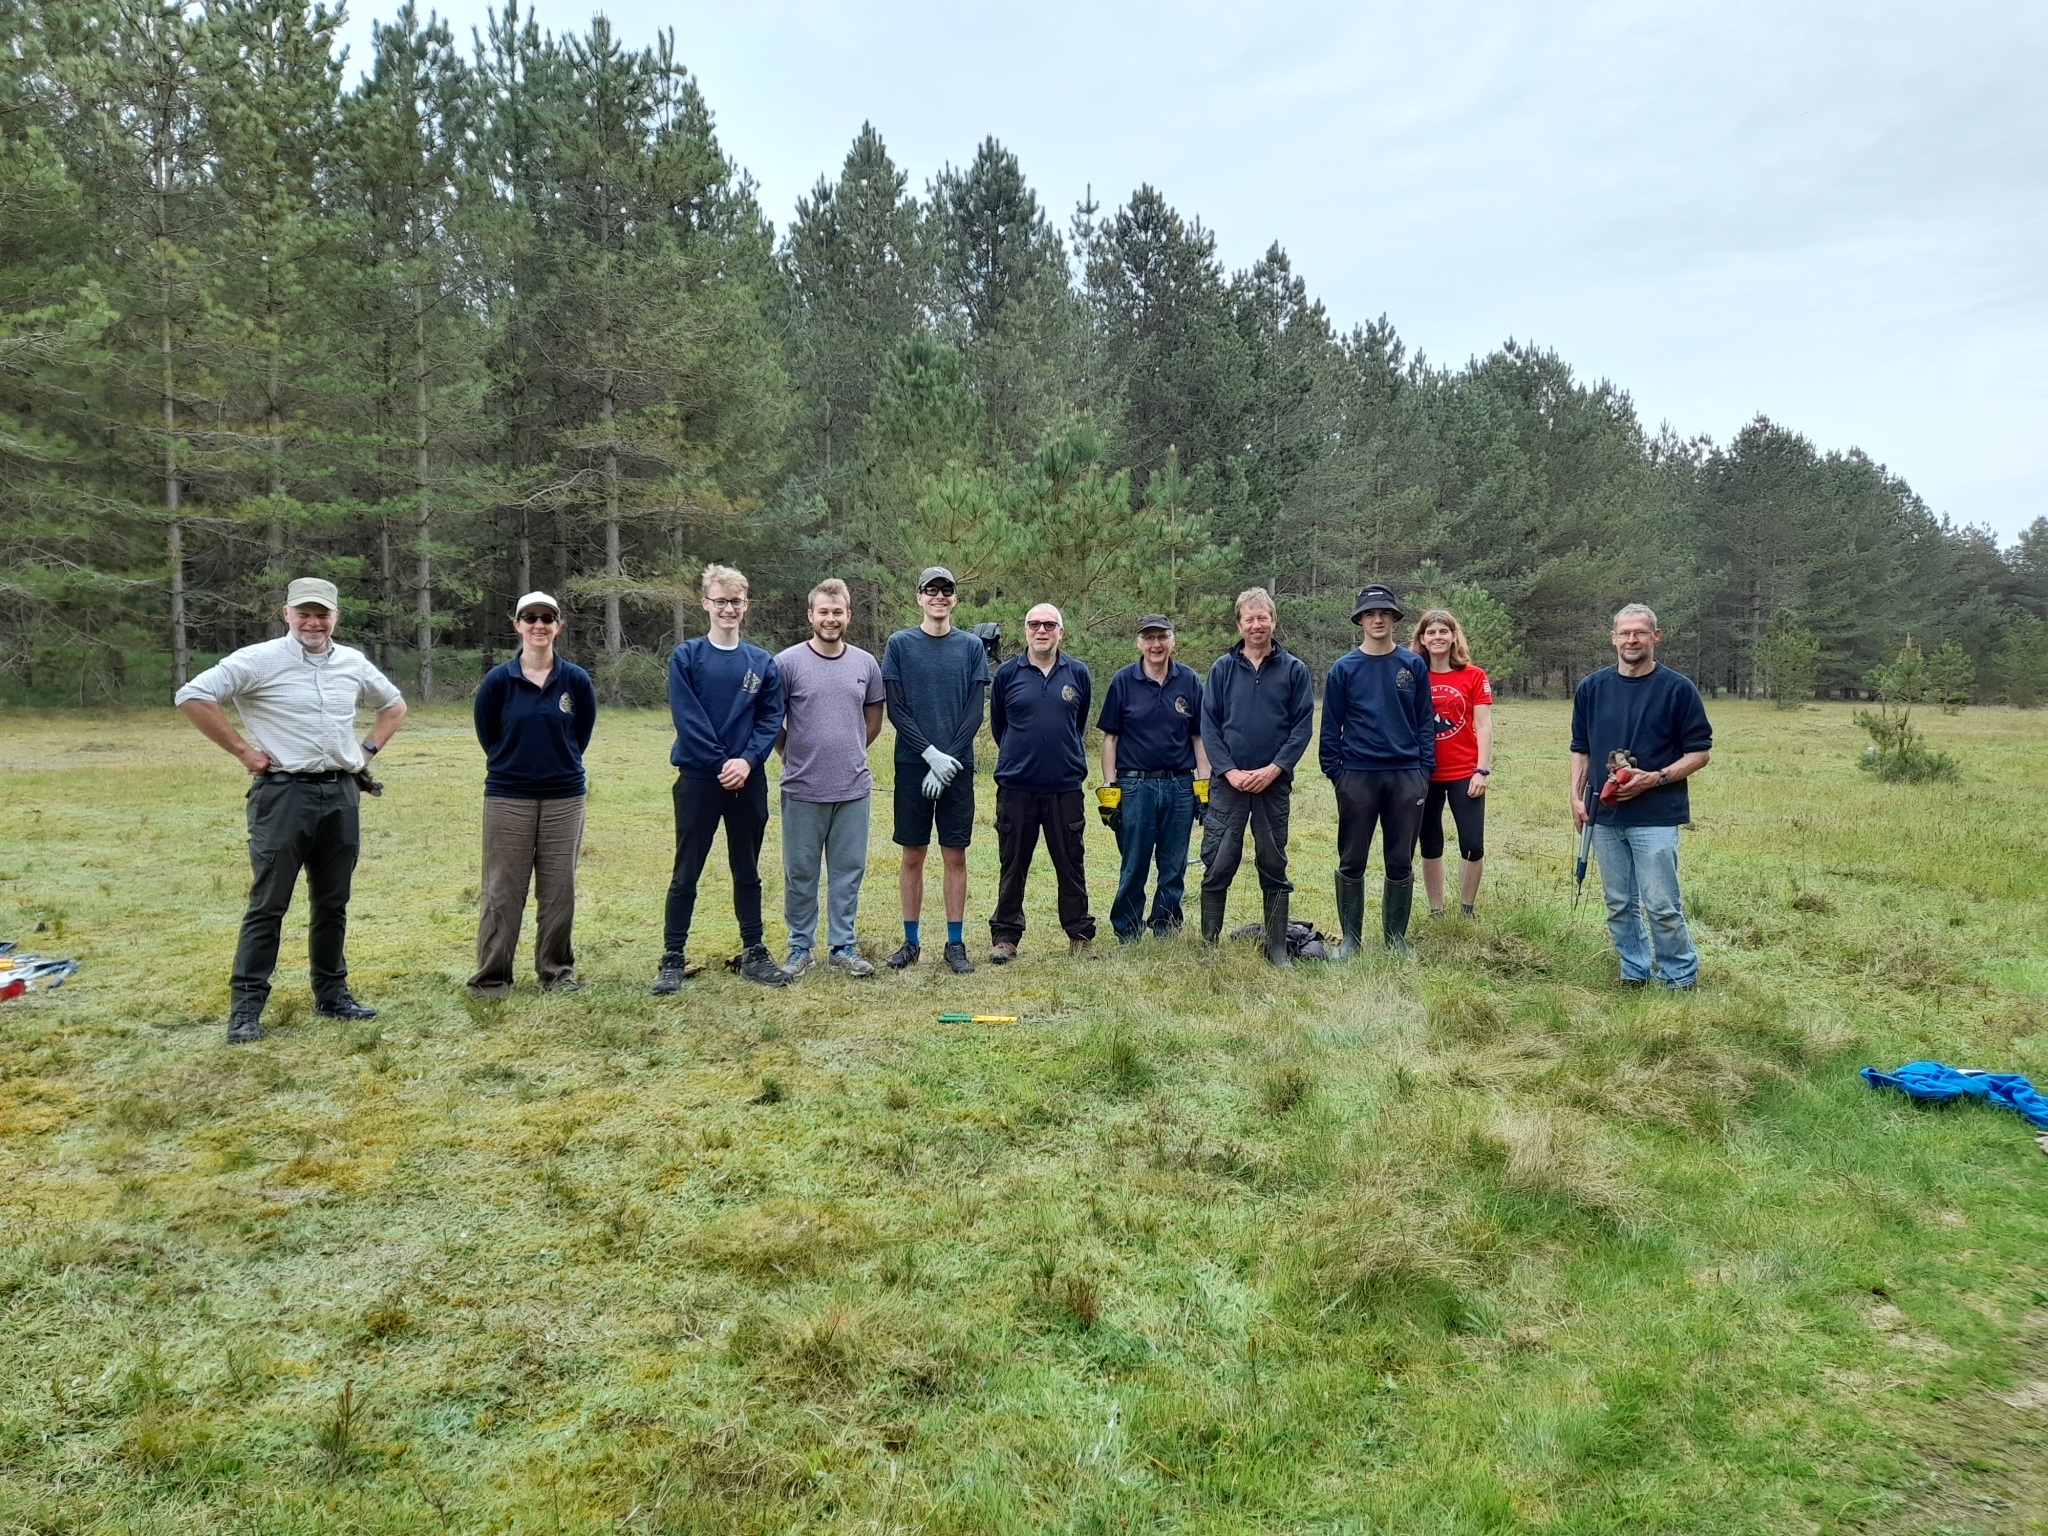 A photo from the FoTF Conservation Event - May 2022 - Self Sown Fir Removal at Kings Forest : A group photo of volunteers at the event